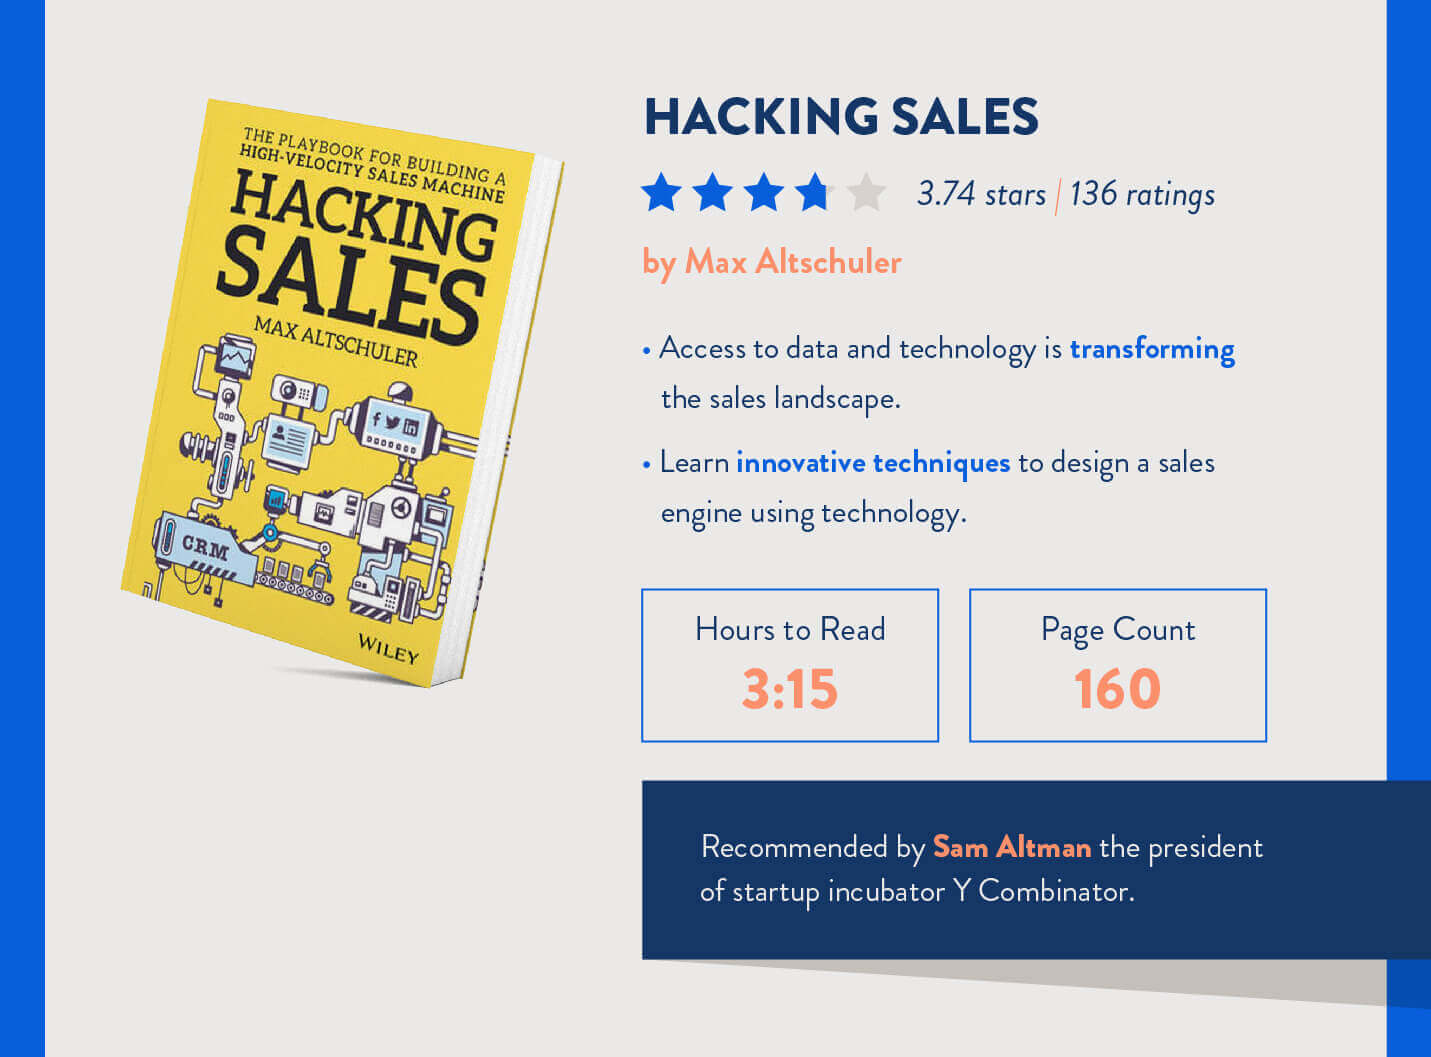 hacking sales book with ratings, time to read, page count, and recommendations